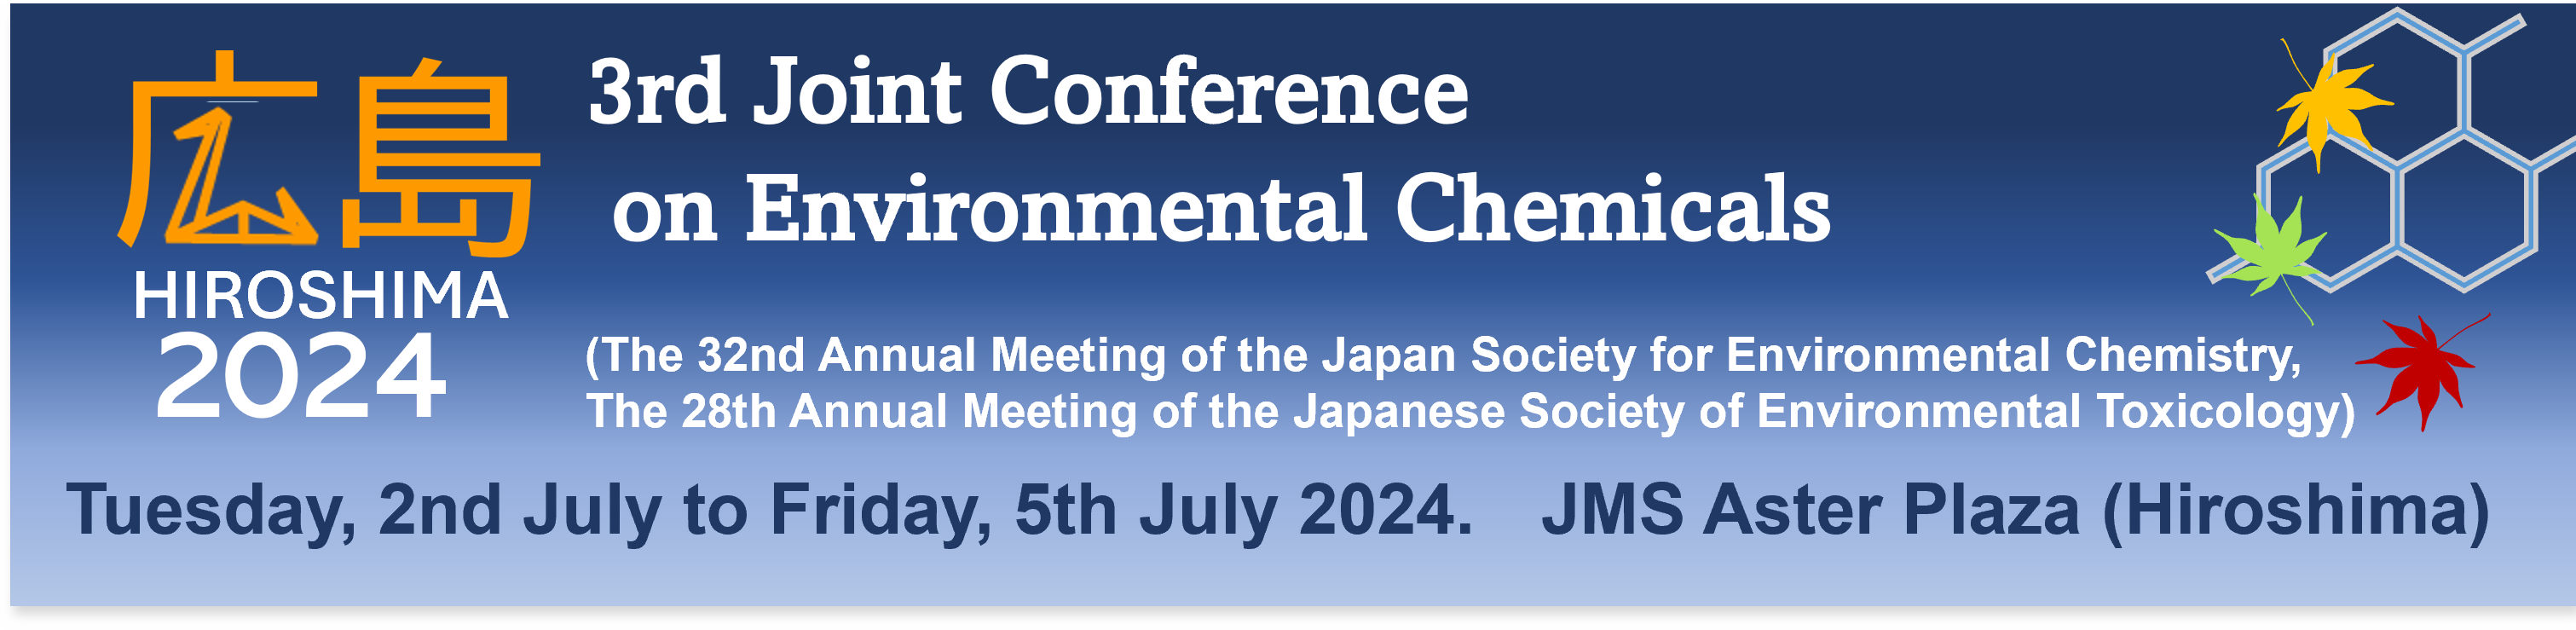 3rd Joint Conference on Environmental Chemicals